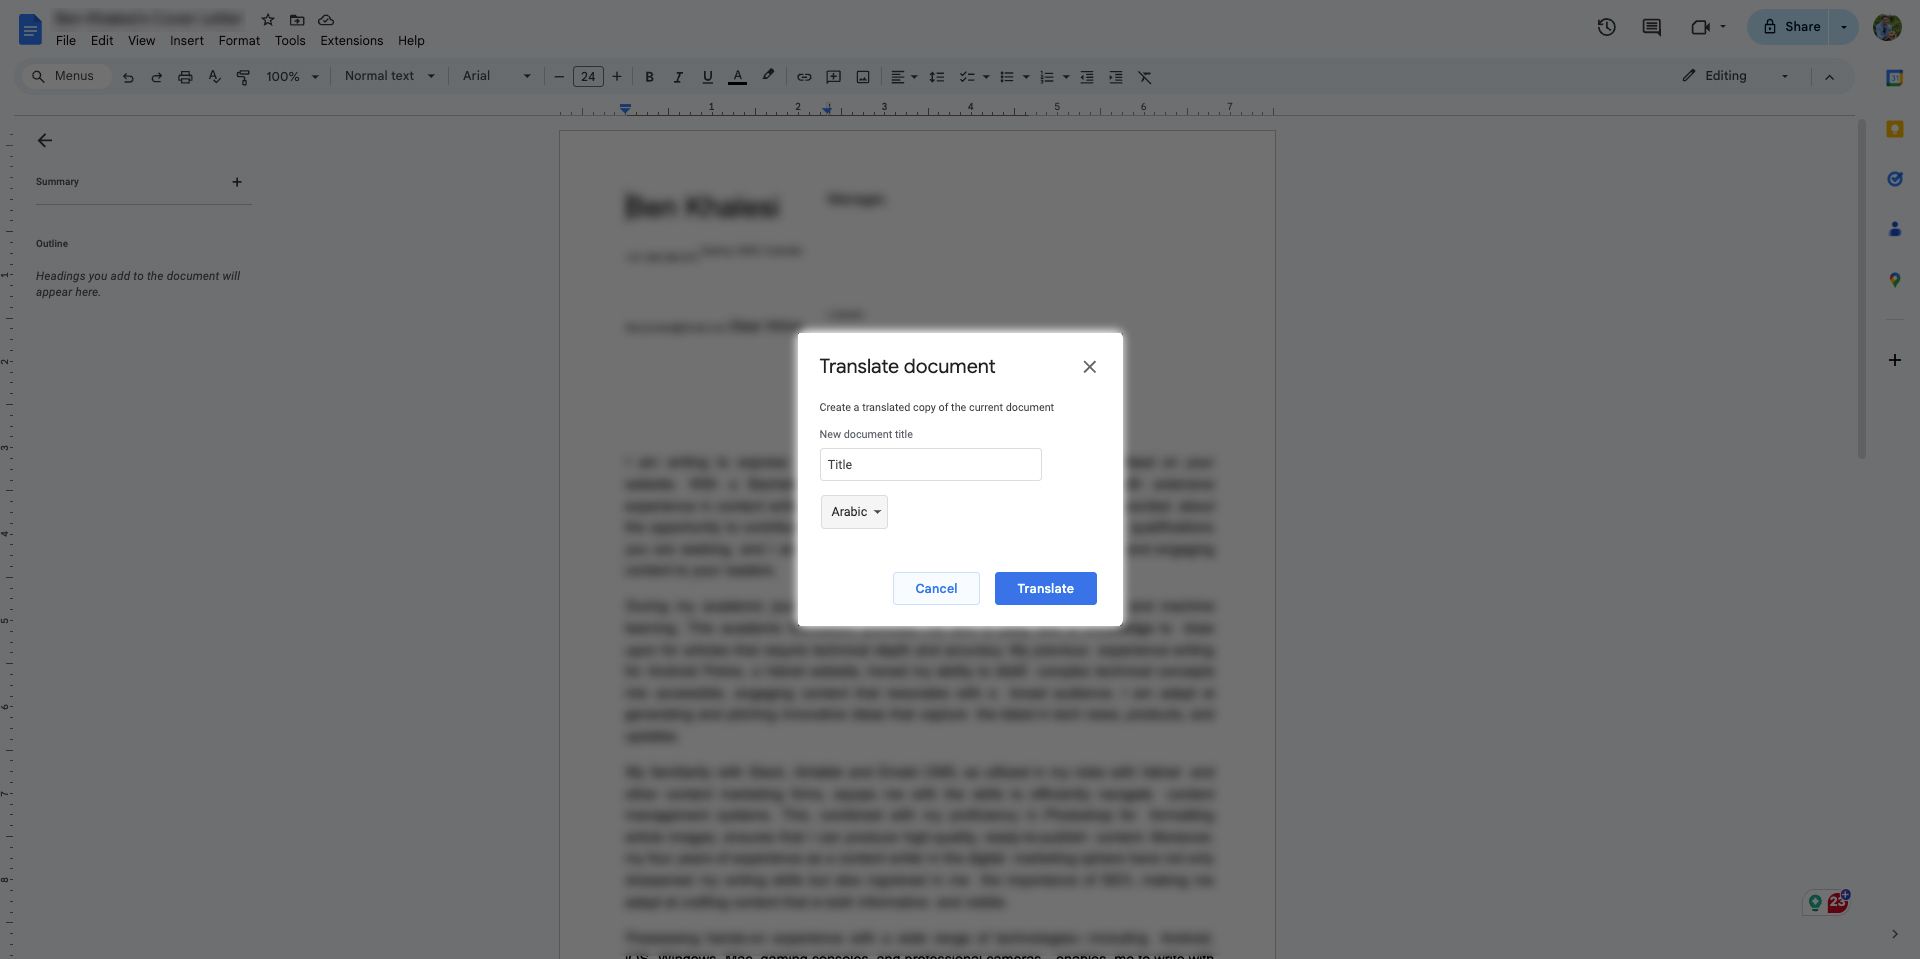 The image displays a Google Docs document with a dialog box titled "Translate document" in the foreground. The dialog box prompts to create a translated copy of the current document, with fields to enter a new document title and select a language.